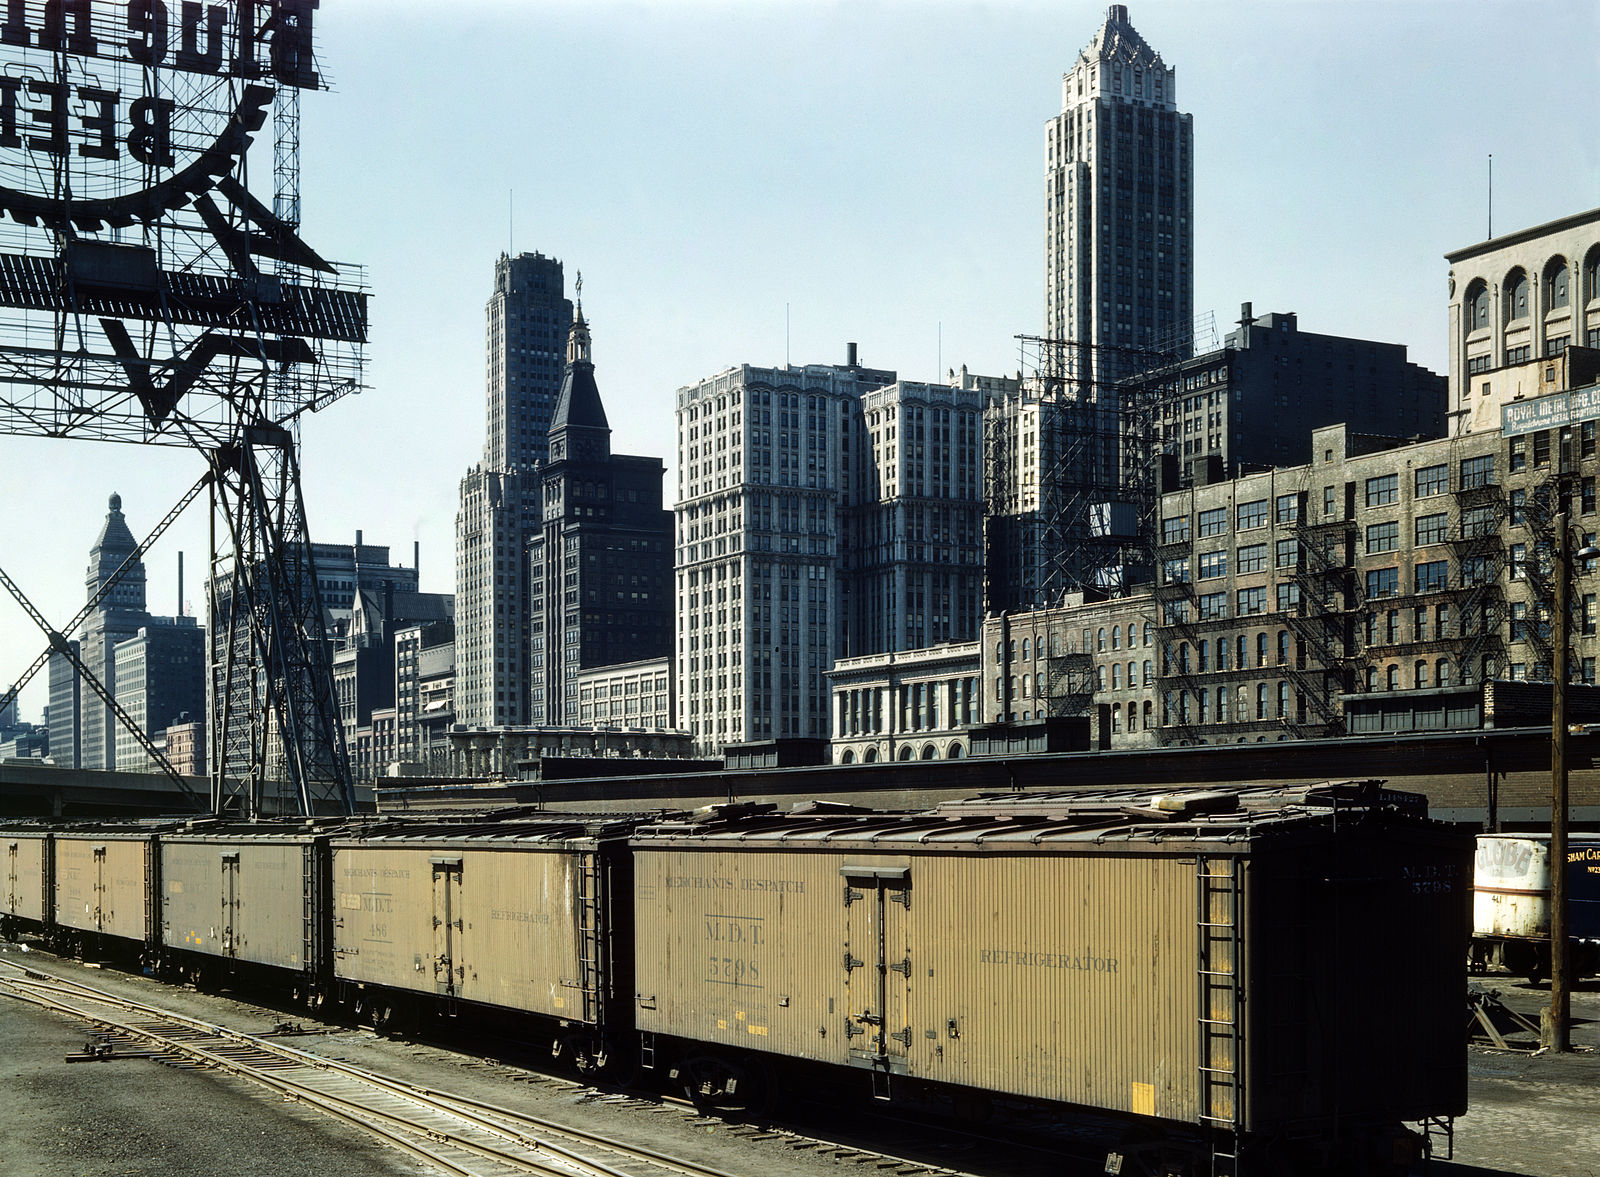 A train in front of the Chicago Skyline